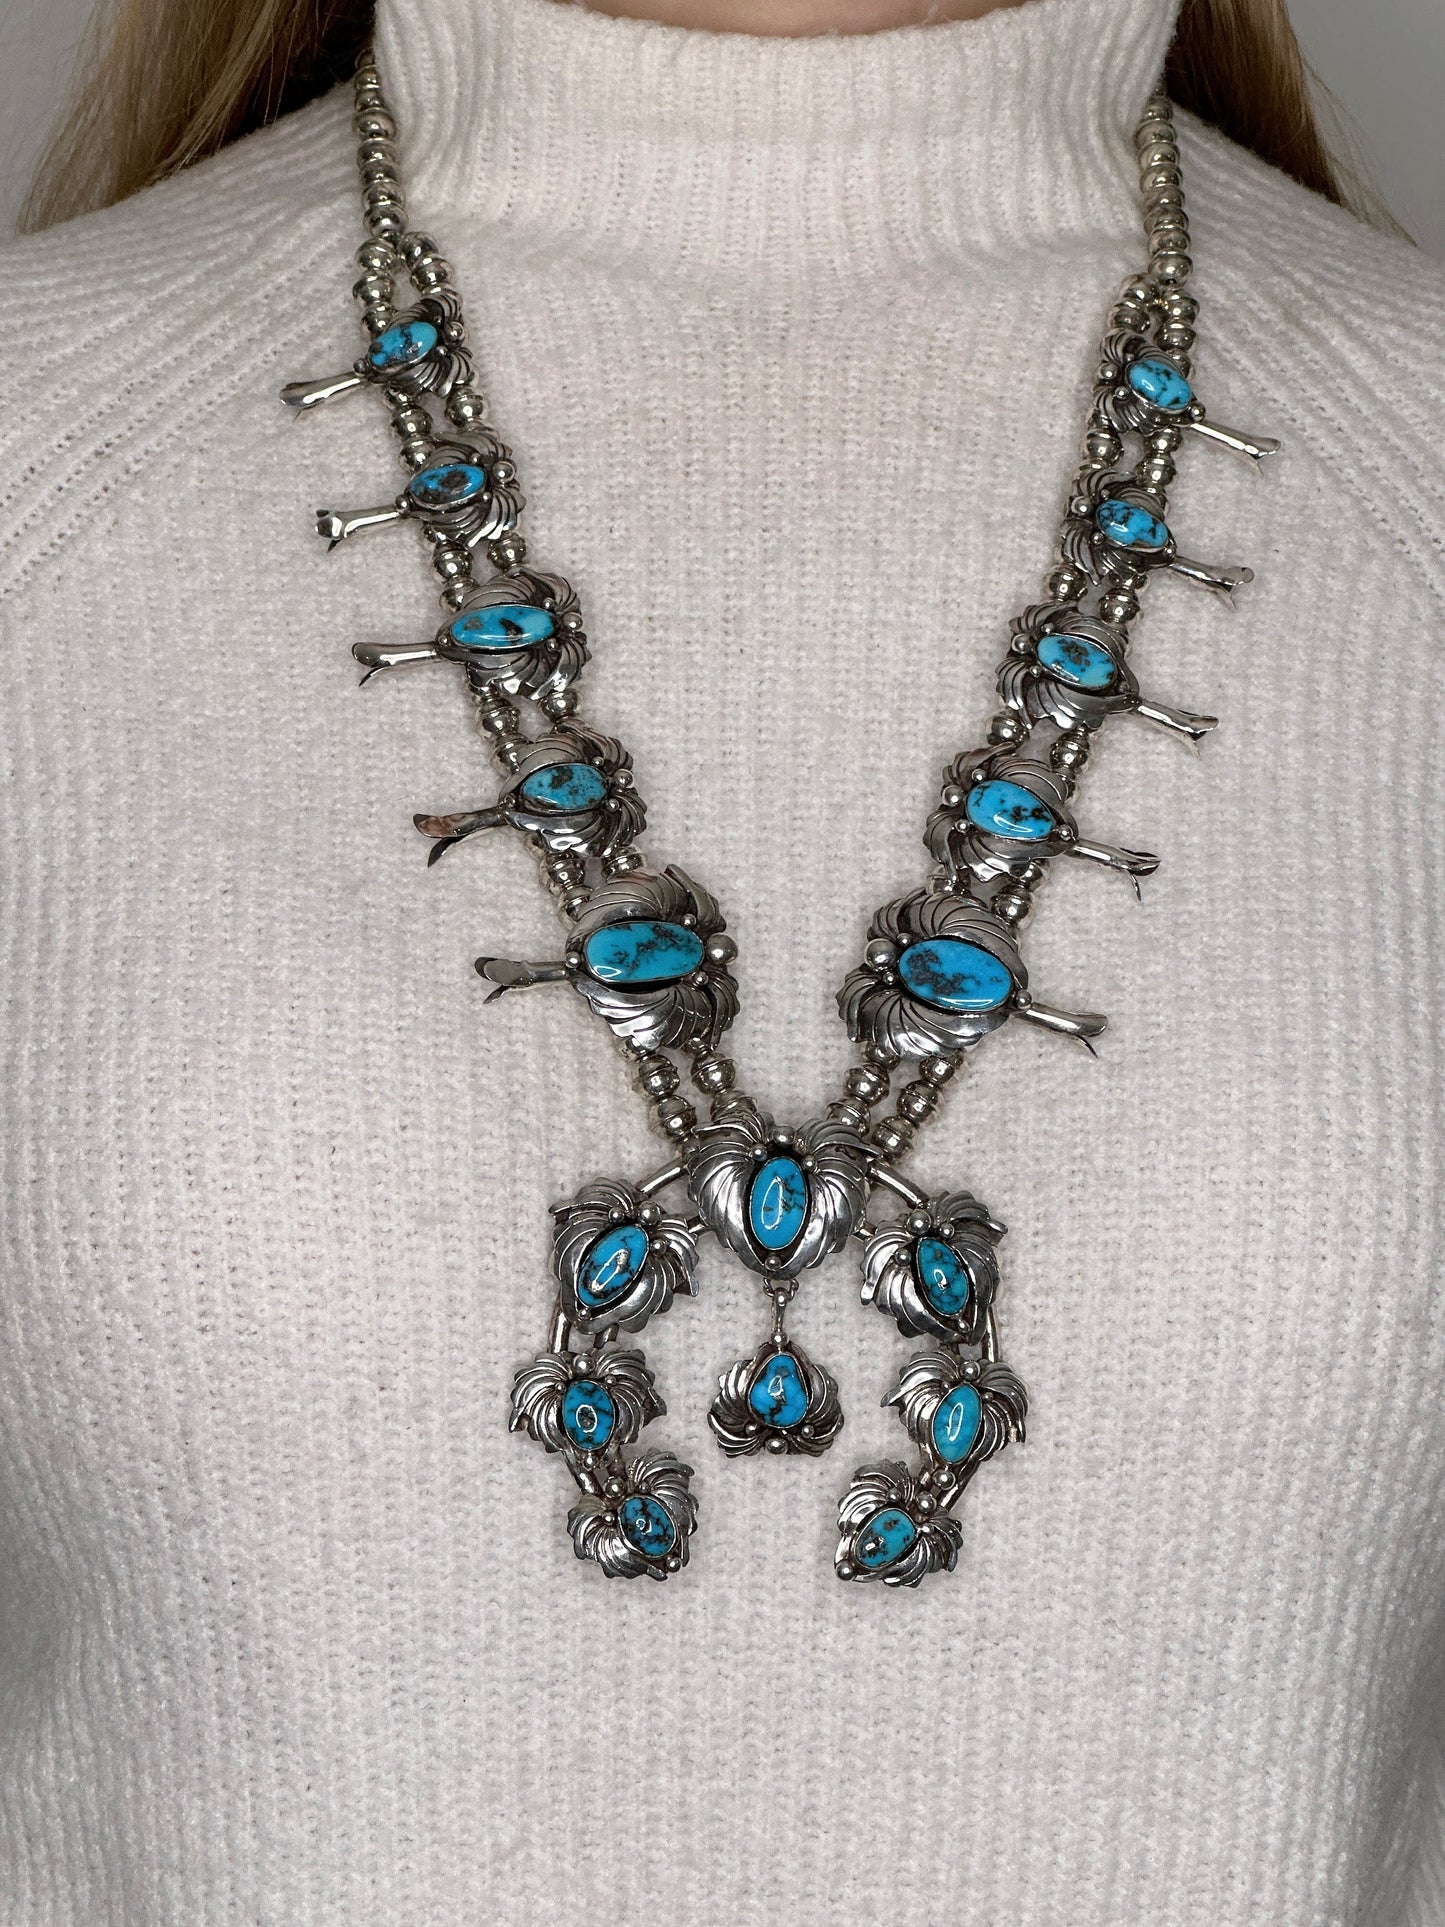 Vintage Native American Sterling Silver Blue Turquoise Squash Blossom Necklace Earrings Set